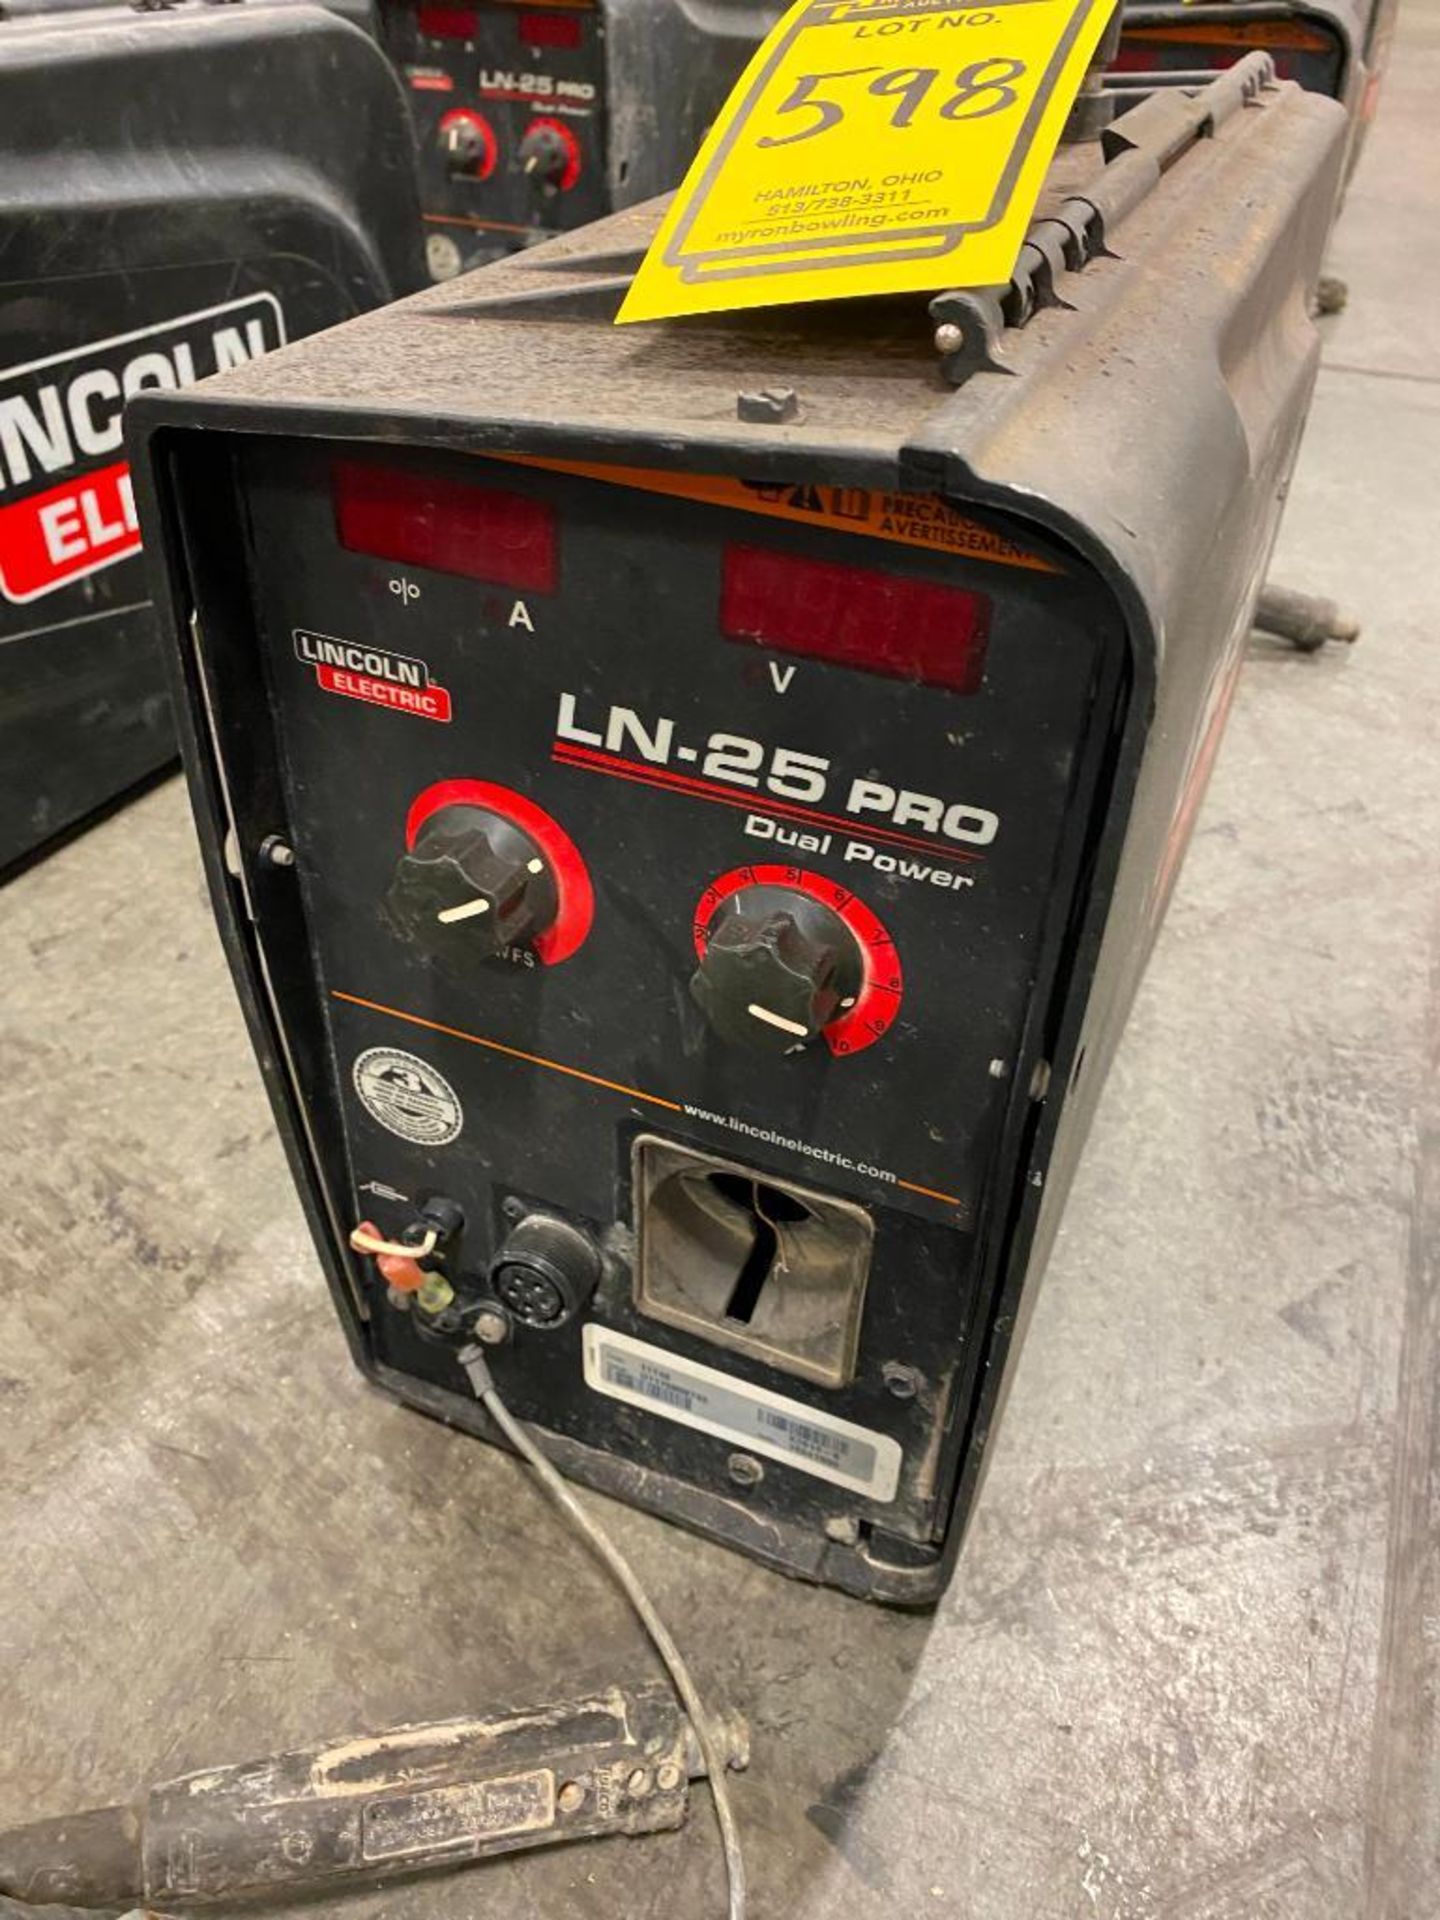 Lincoln LN-25 Pro Dual Power Wire Feeder Suitcase Welder, S/N U1170808743 - Image 3 of 3